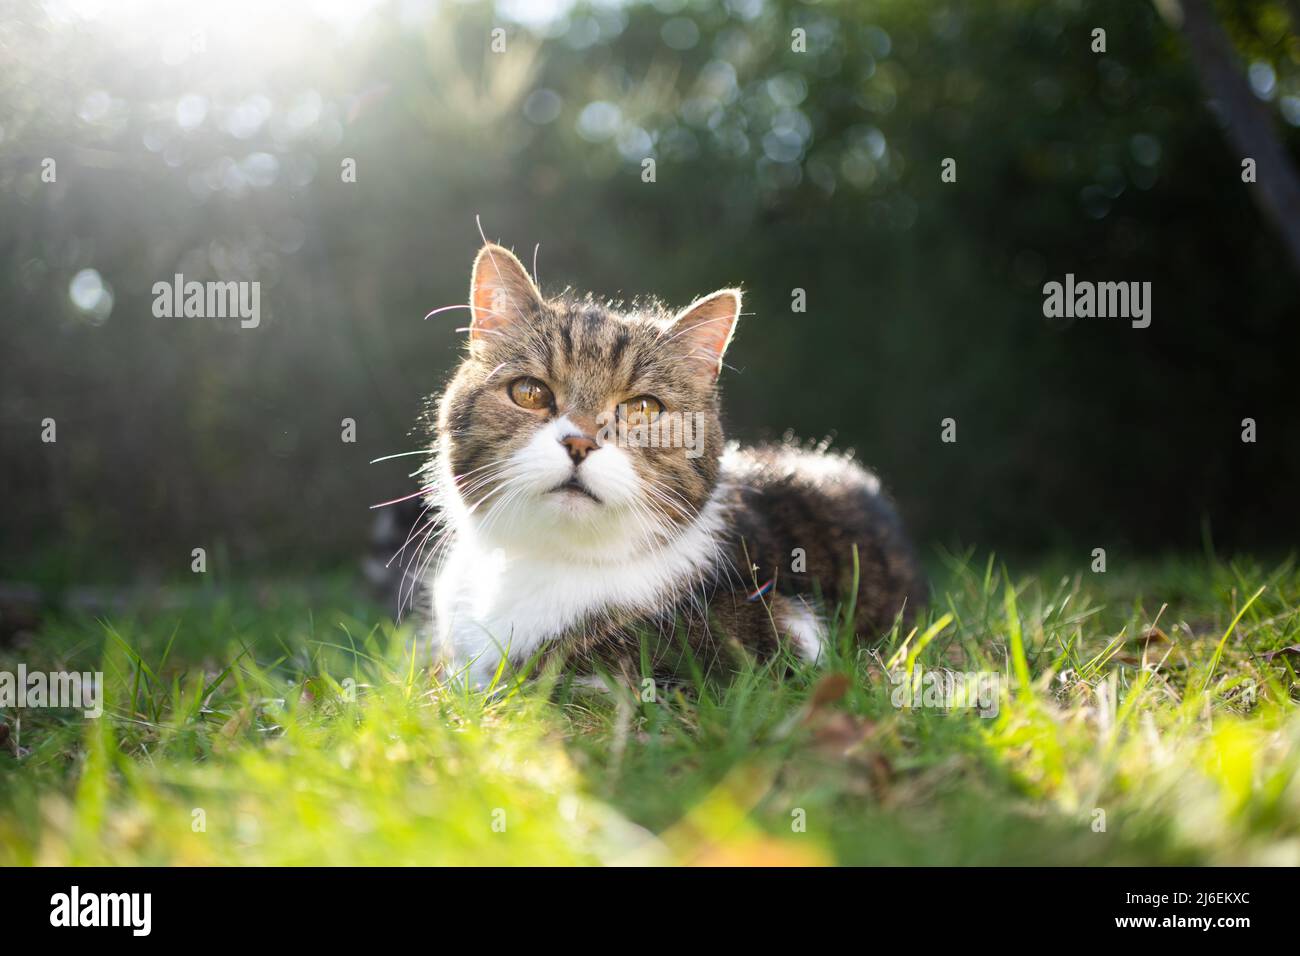 cute cat resting on lawn in backlight Stock Photo